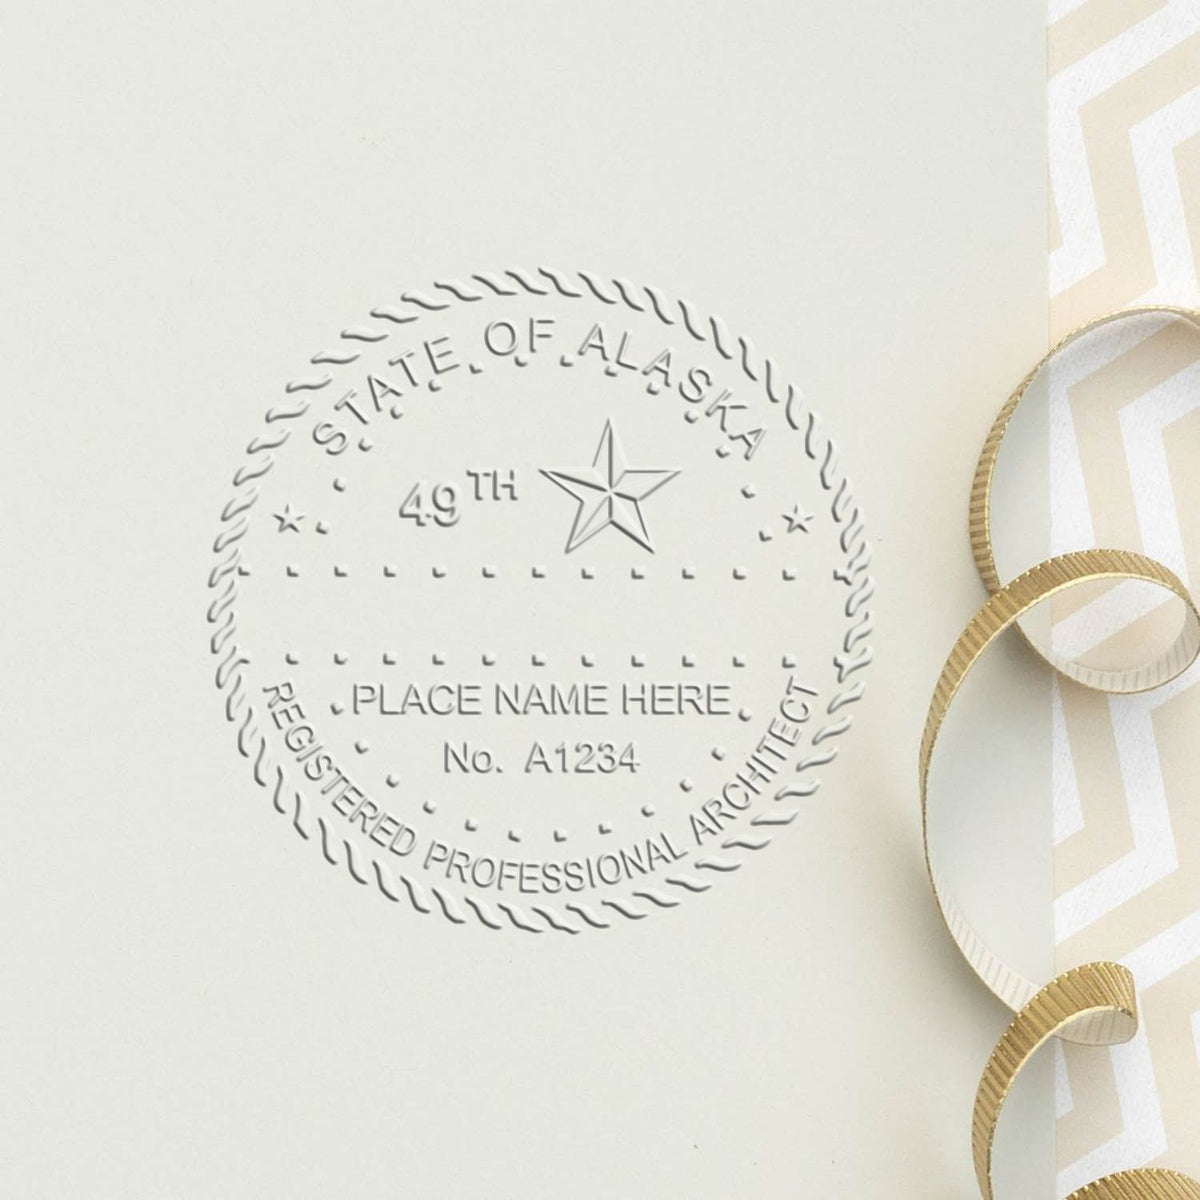 This paper is stamped with a sample imprint of the Extended Long Reach Alaska Architect Seal Embosser, signifying its quality and reliability.